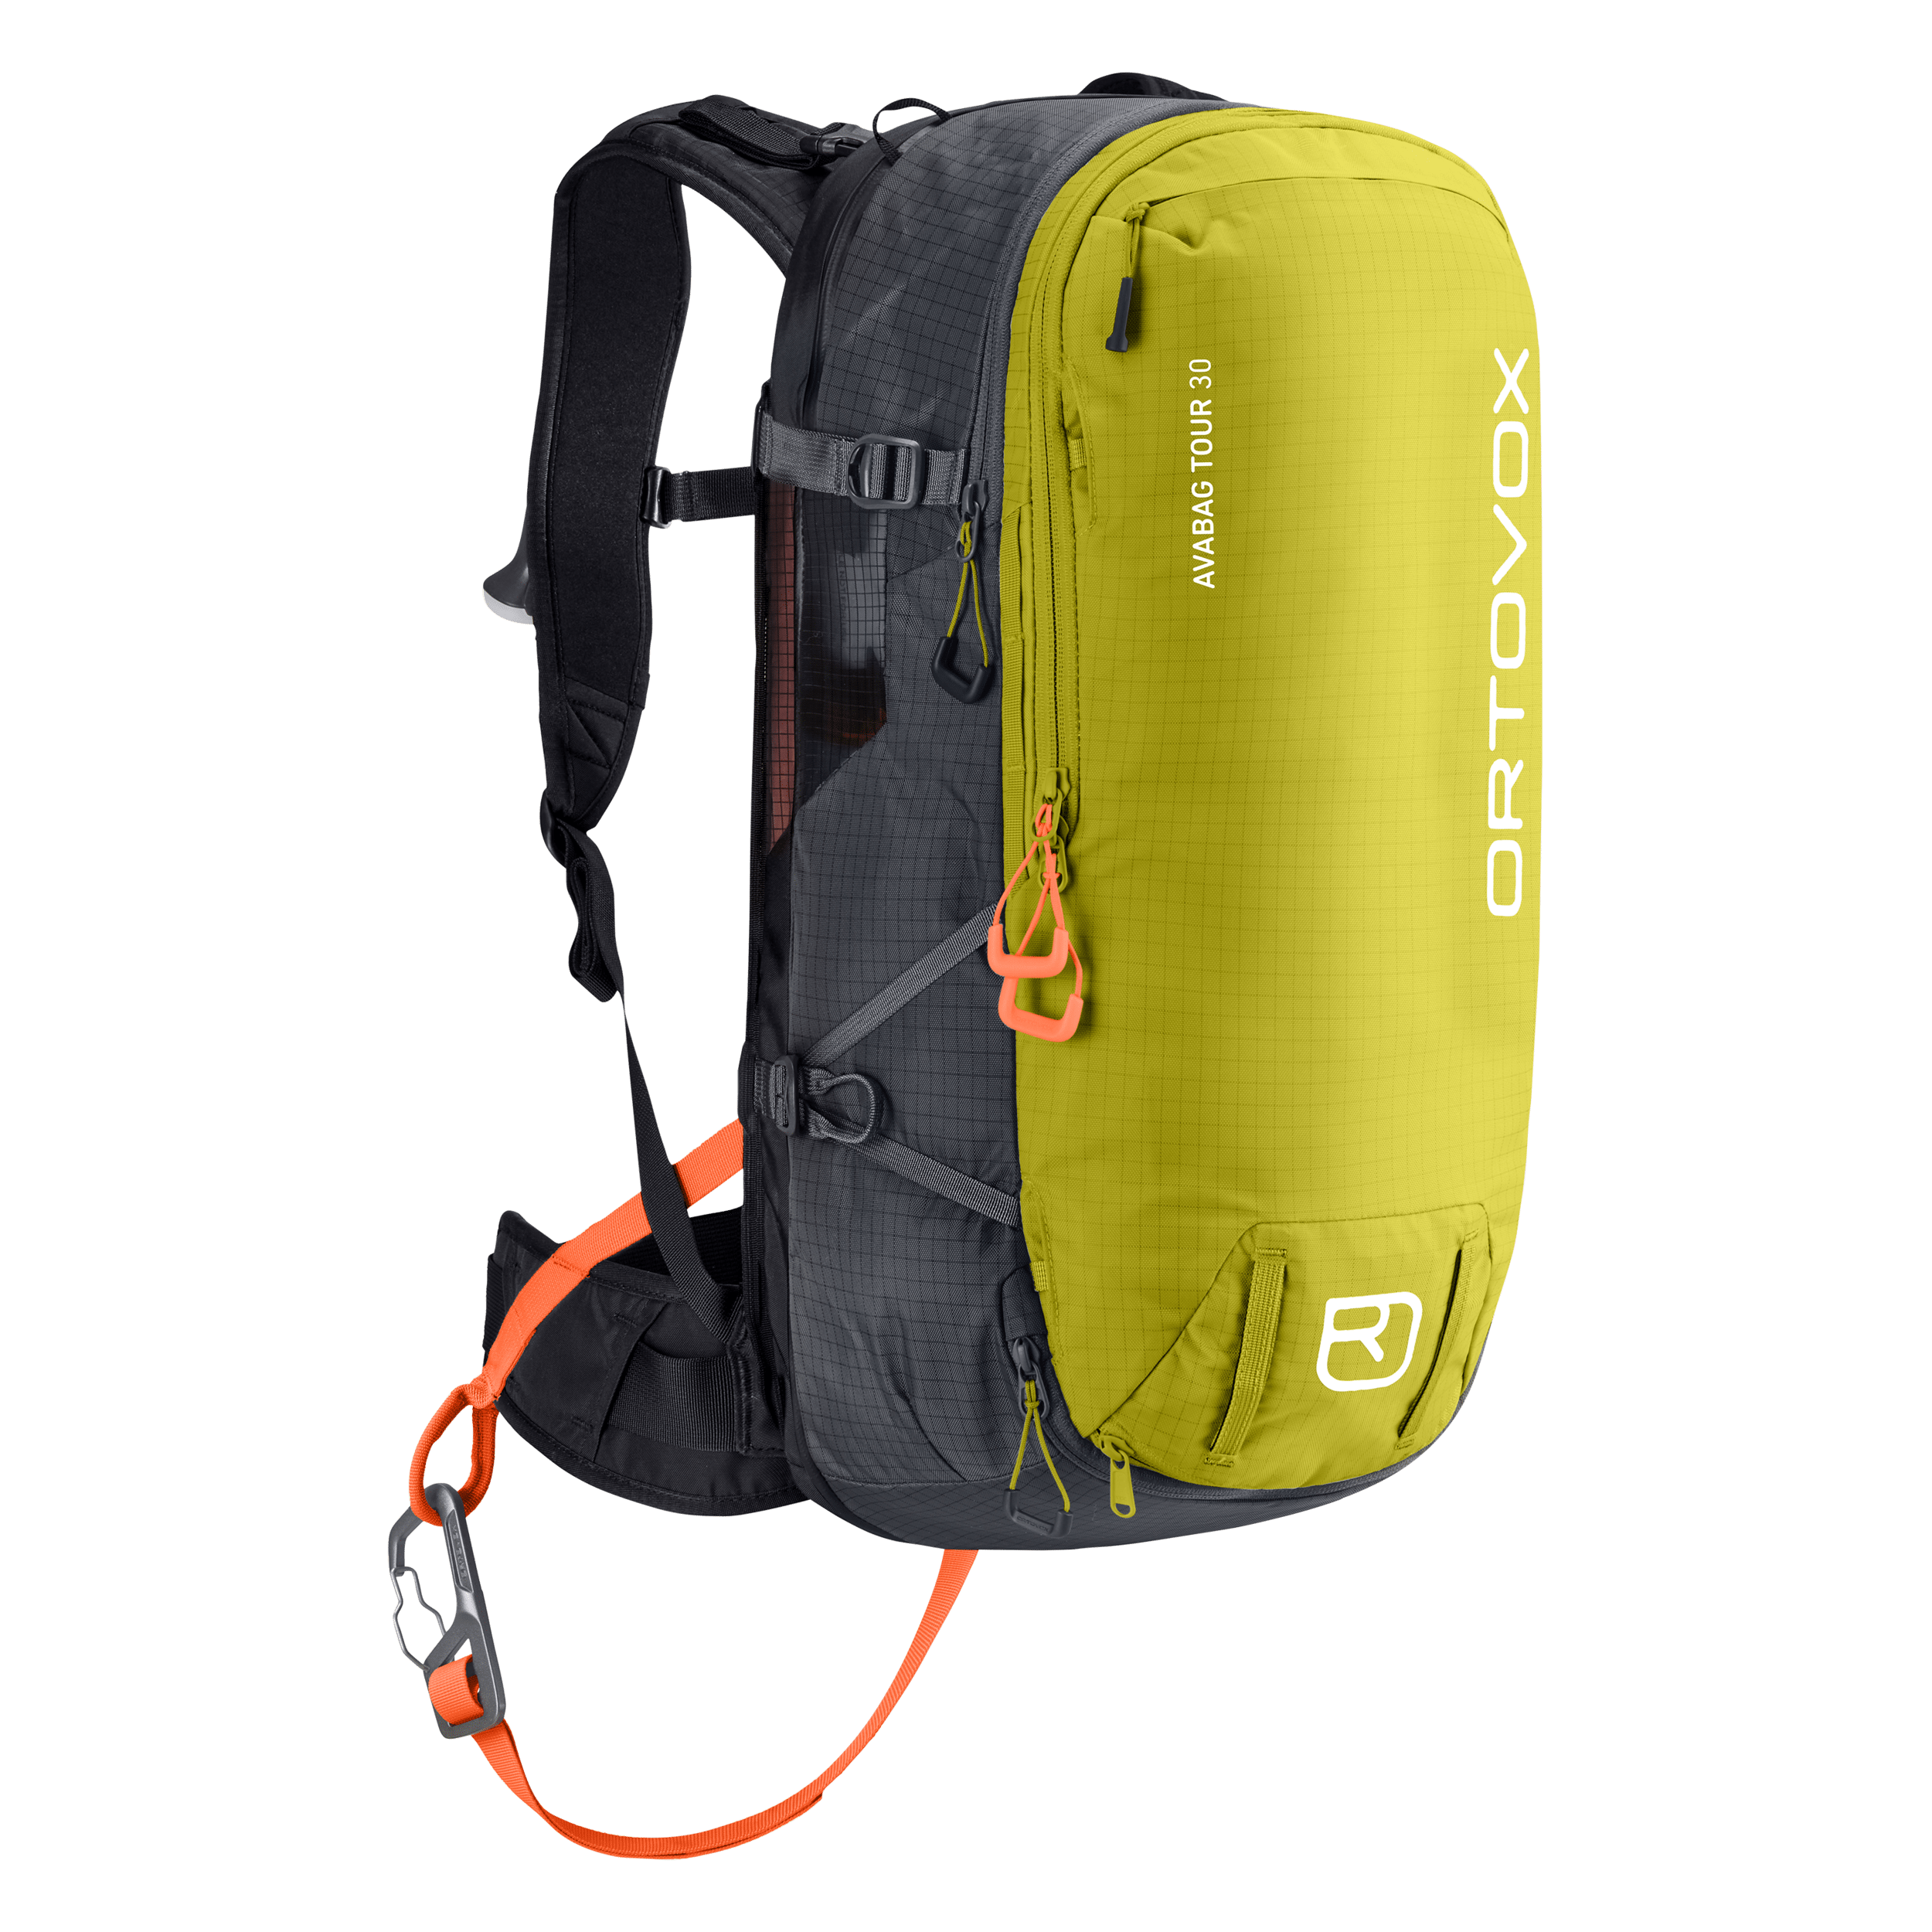 ortovox Avalanche Airbag Pacific Green Litric Tour 30 Avalanche Airbag 49221PG